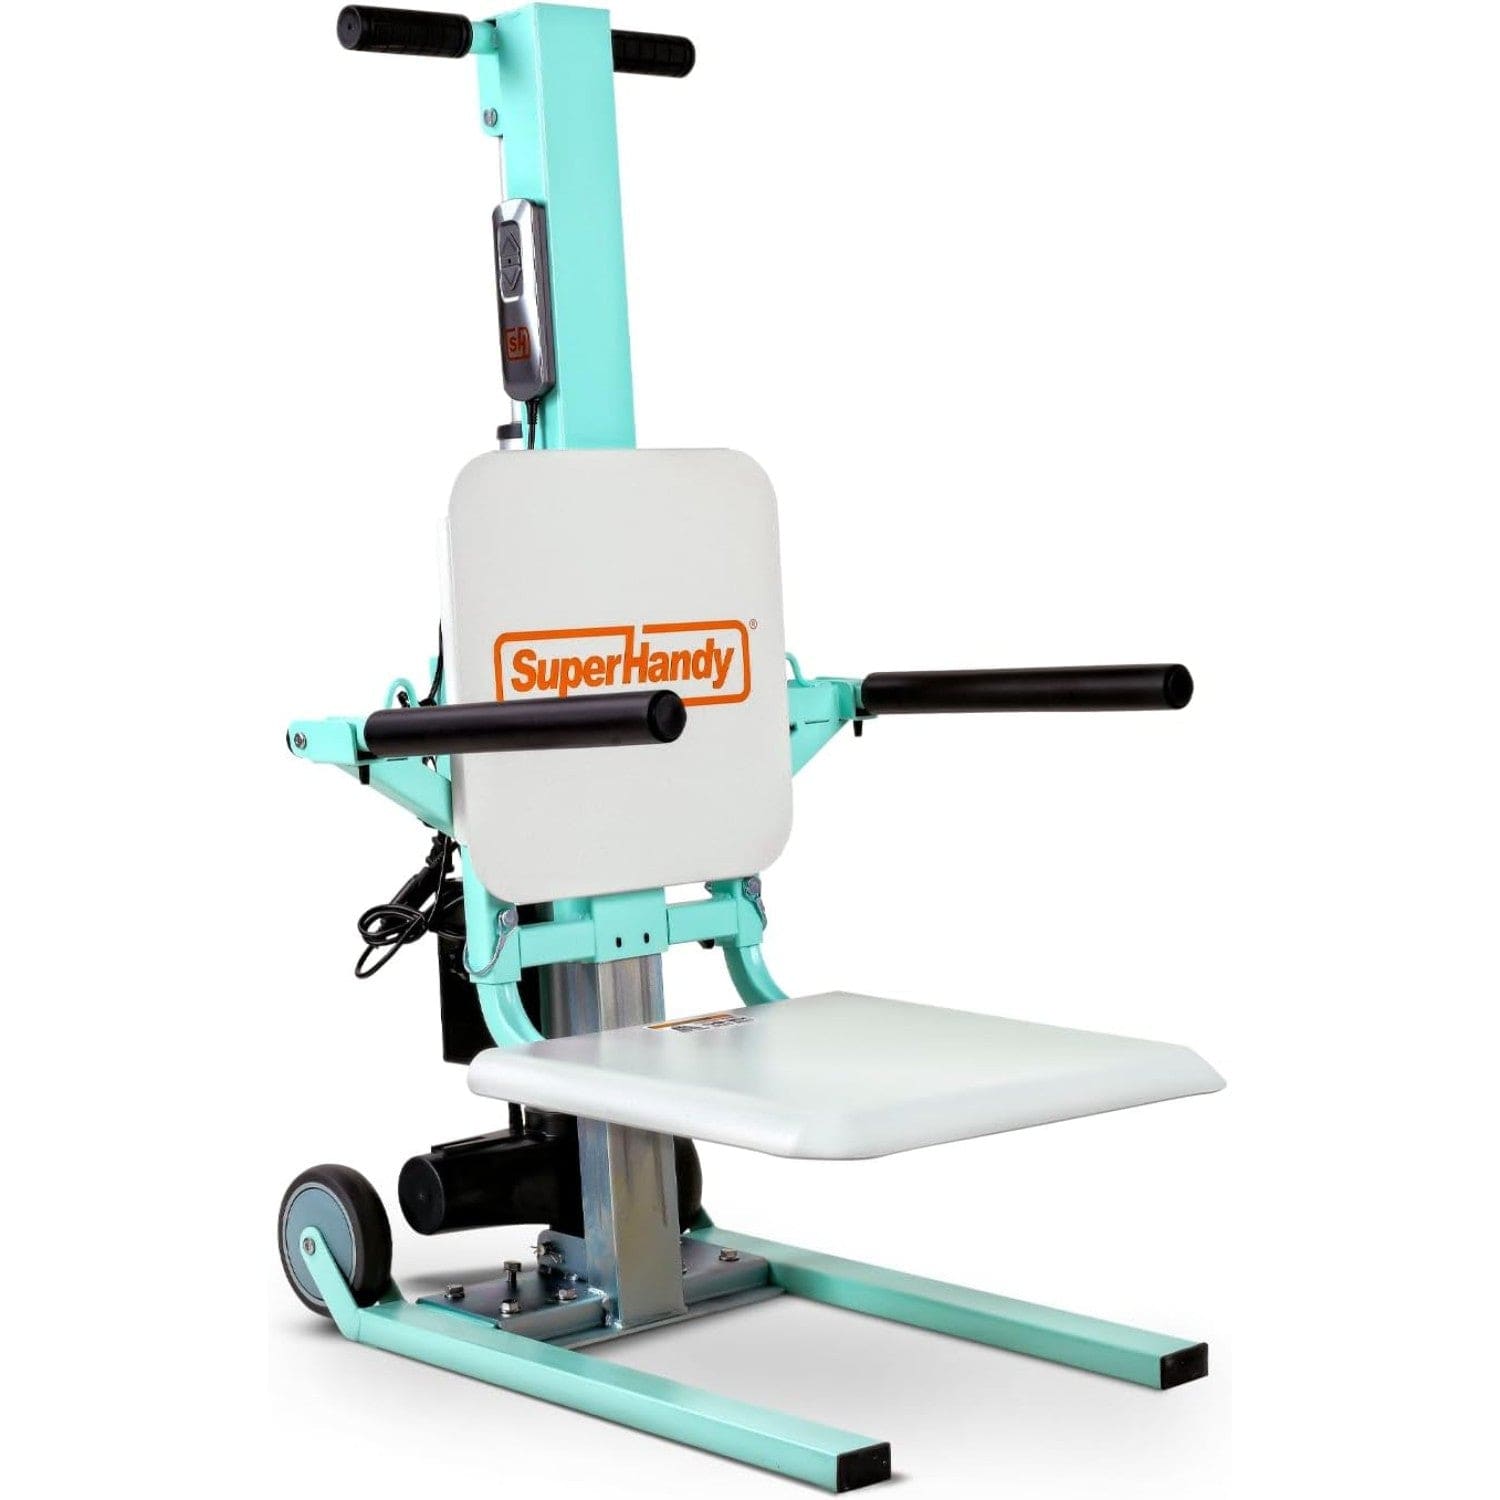 SuperHandy SuperHandy Electric Floor Lift Standing Aid - Easy Transport & Storage, 330Lbs Weight Limit